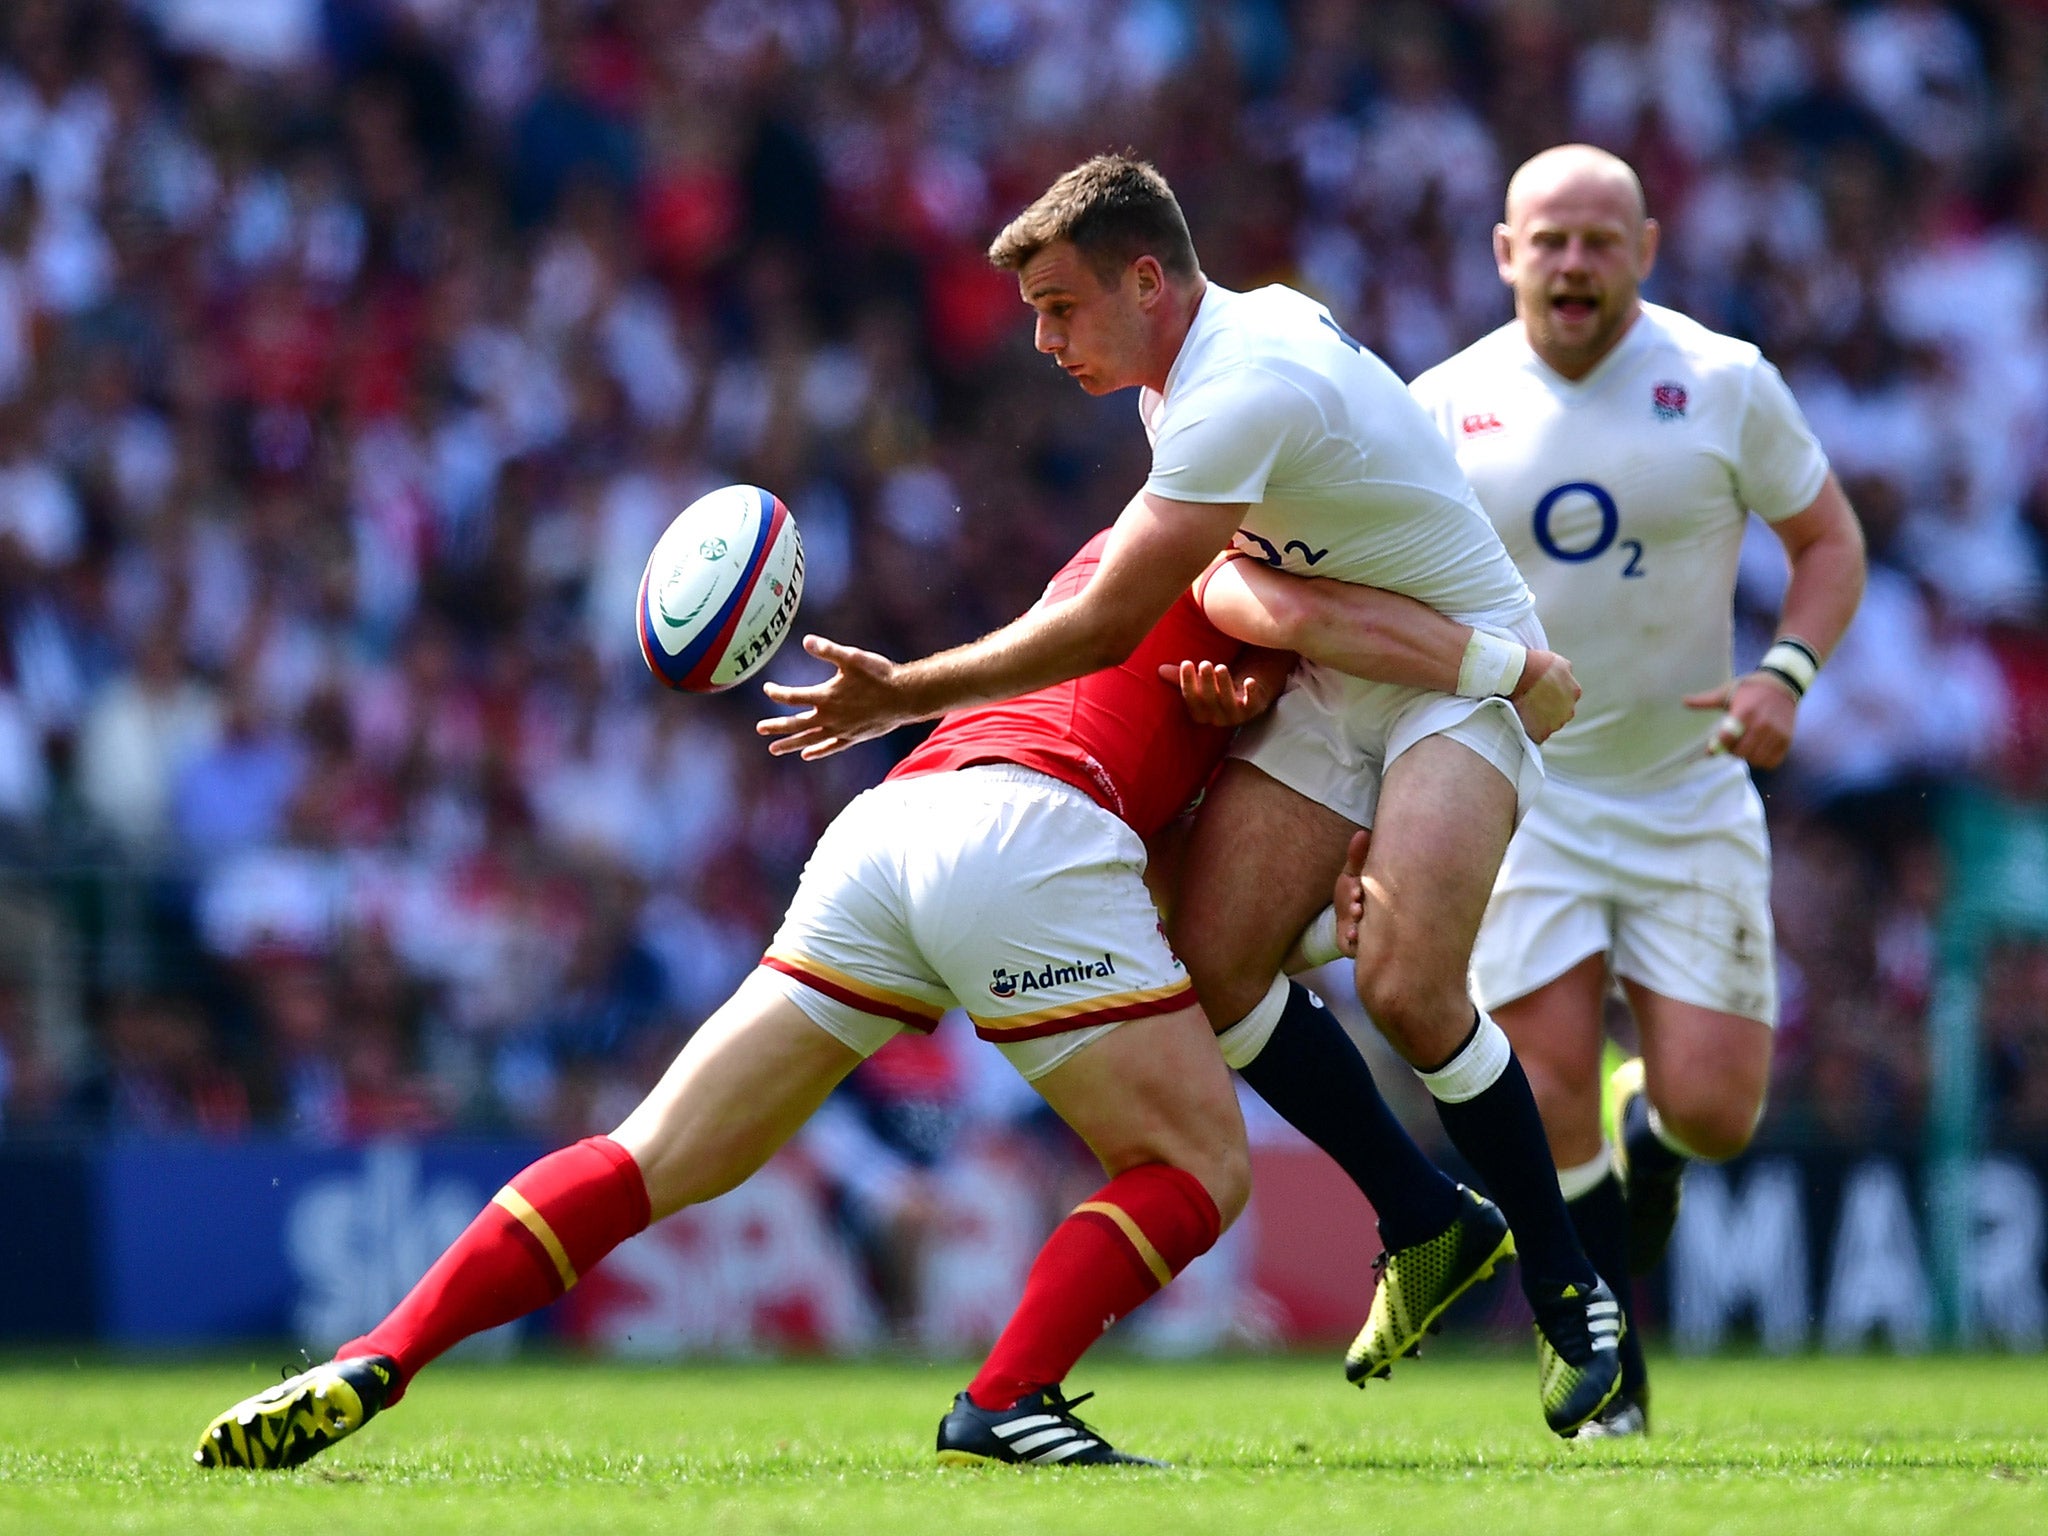 George Ford missed six of his seven kicks during England's 27-13 win over Wales